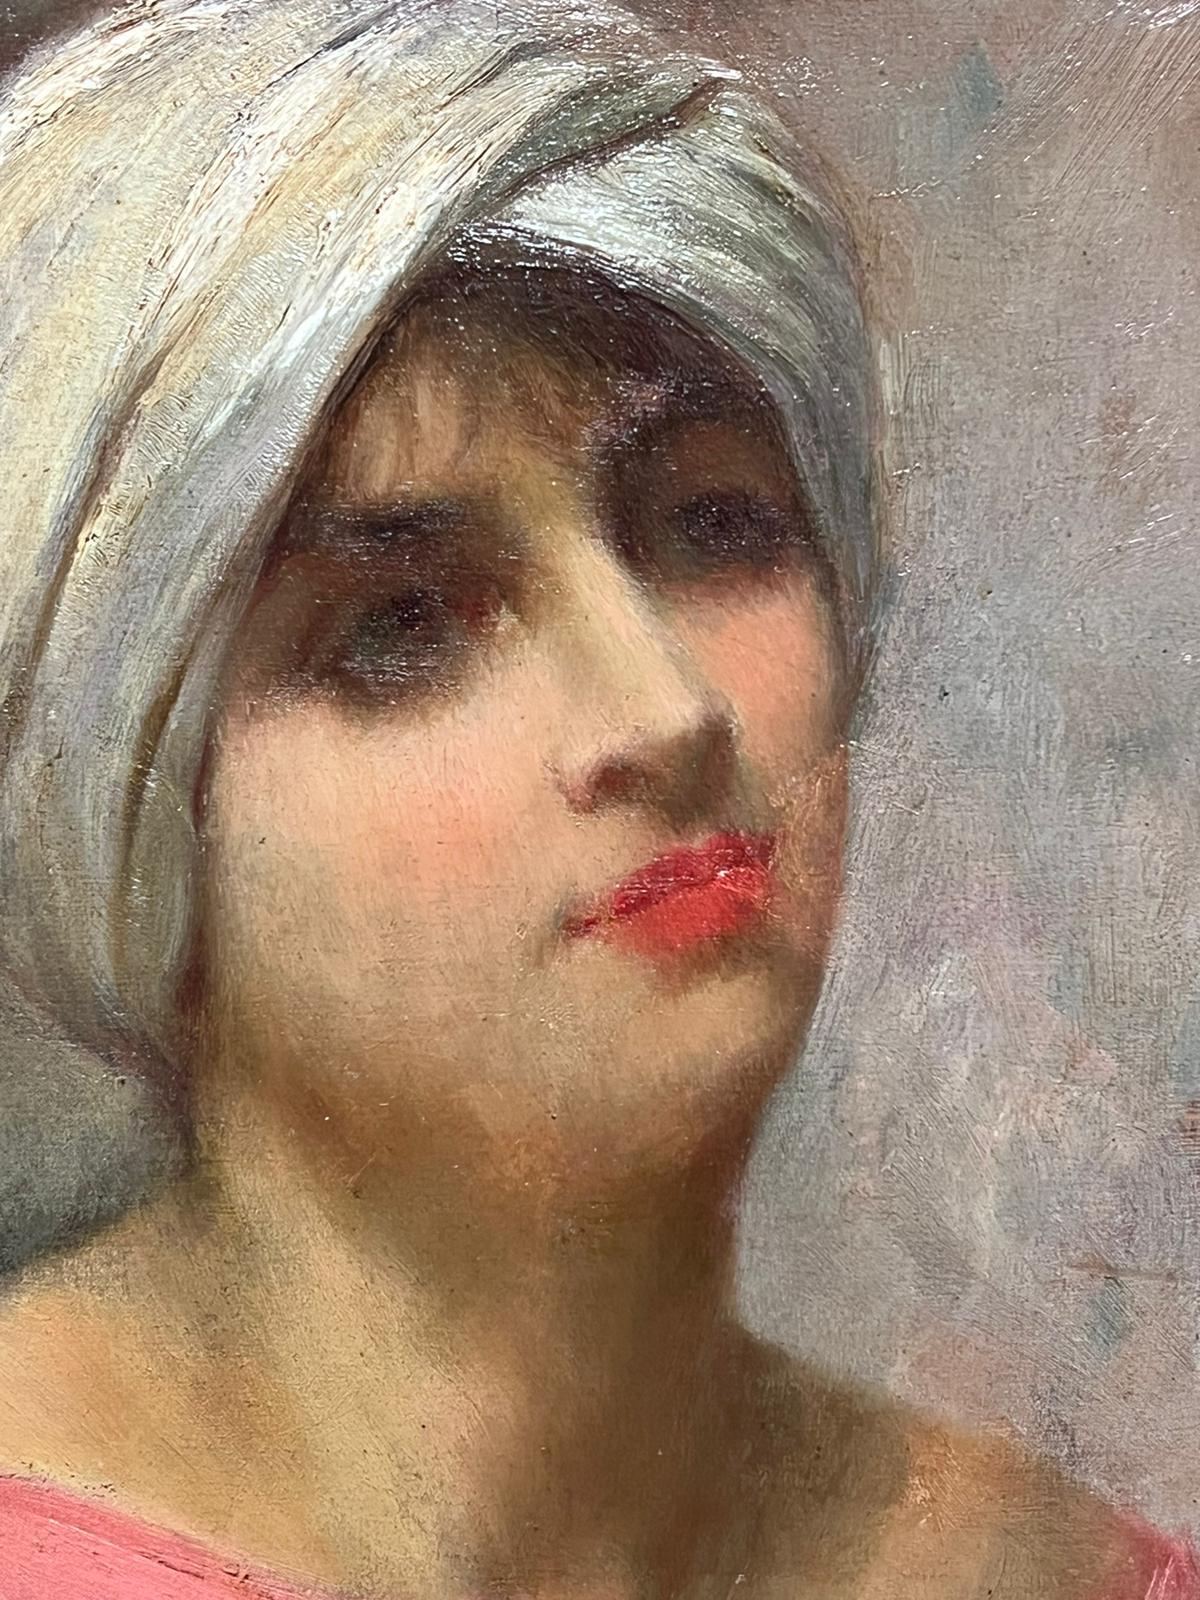 Portrait of a Young Lady wearing pink and a Turban headpiece
by Henri-Charles Daudin (1864-1917, French)
signed oil on wood panel, unframed
board: 14 x 10.5 inches
provenance: private collection, UK
condition: very good and sound condition, shabby